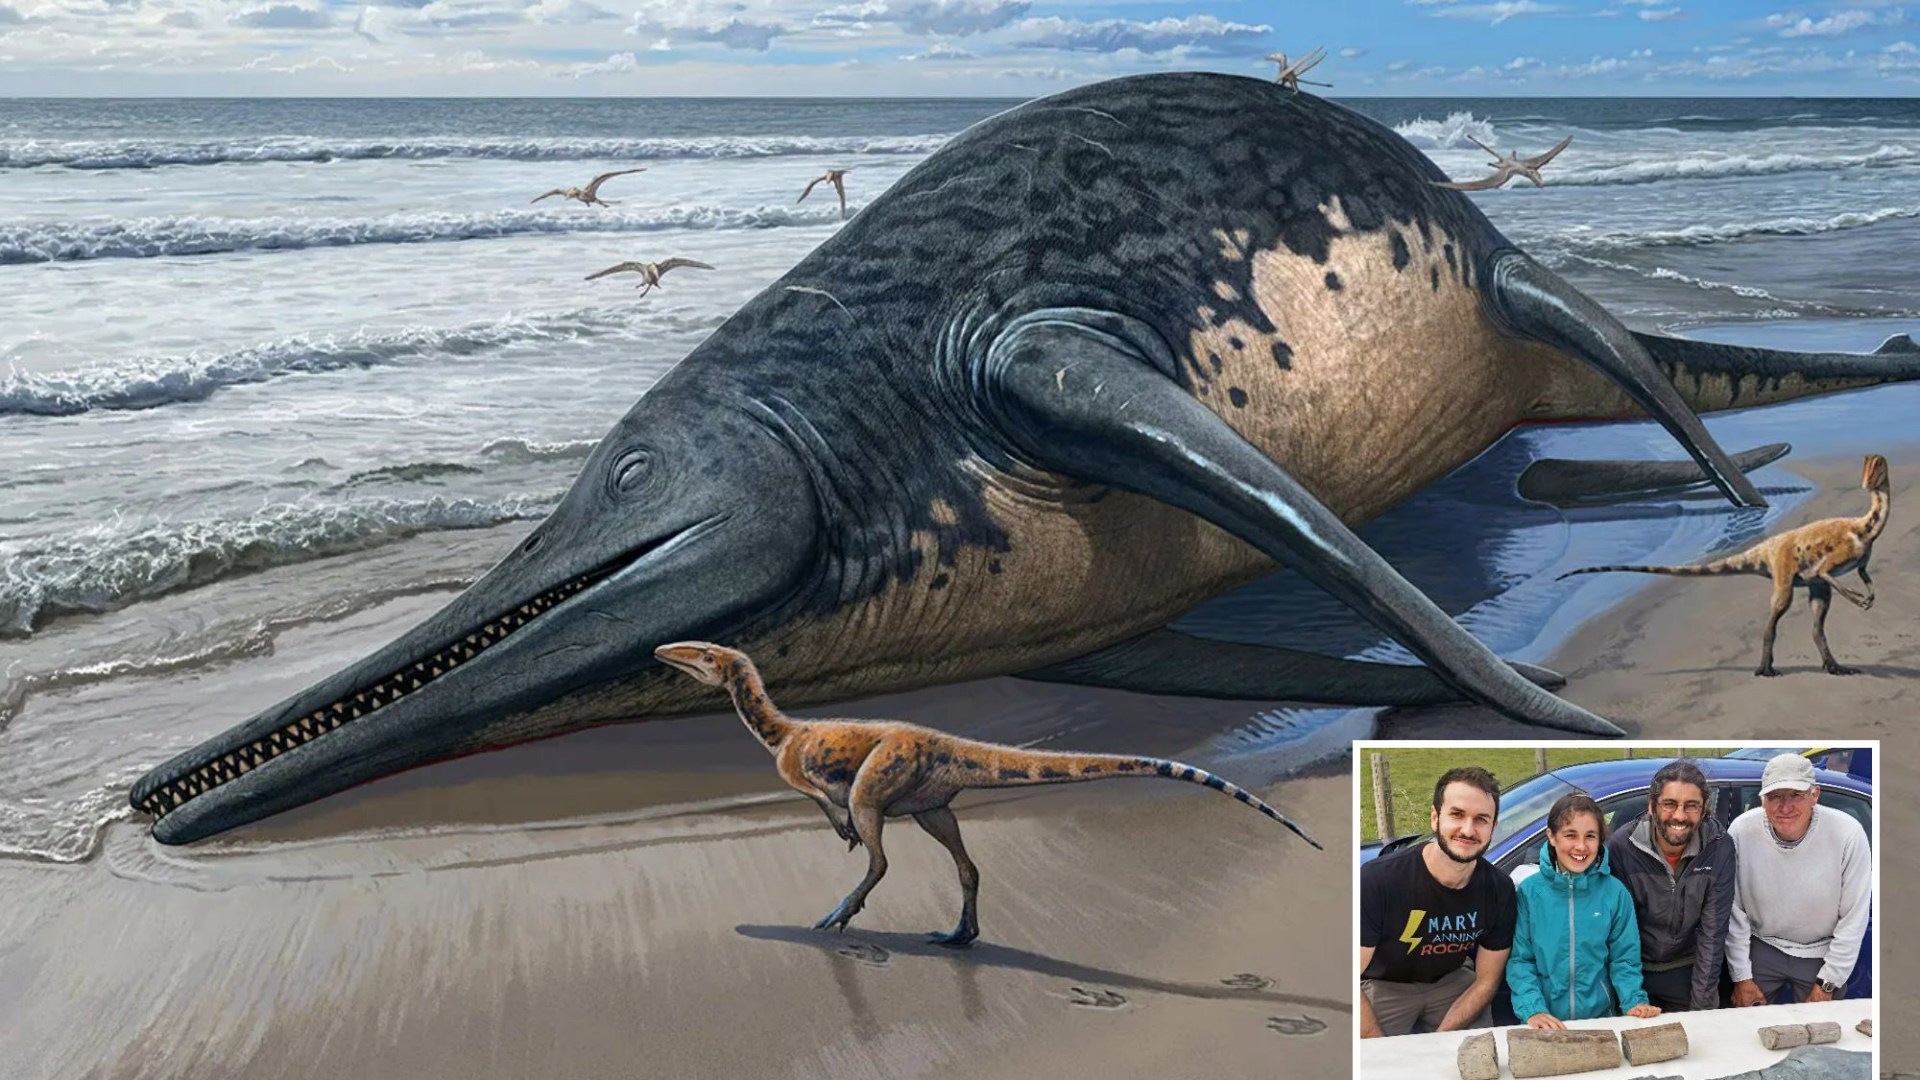 “Uncovering a Colossal Prehistoric Sea Beast Longer Than Two Buses: Young Brit Girl Finds Fossils on Somerset Beach” – Unveiling the secrets of prehistoric creatures through fossil discoveries.